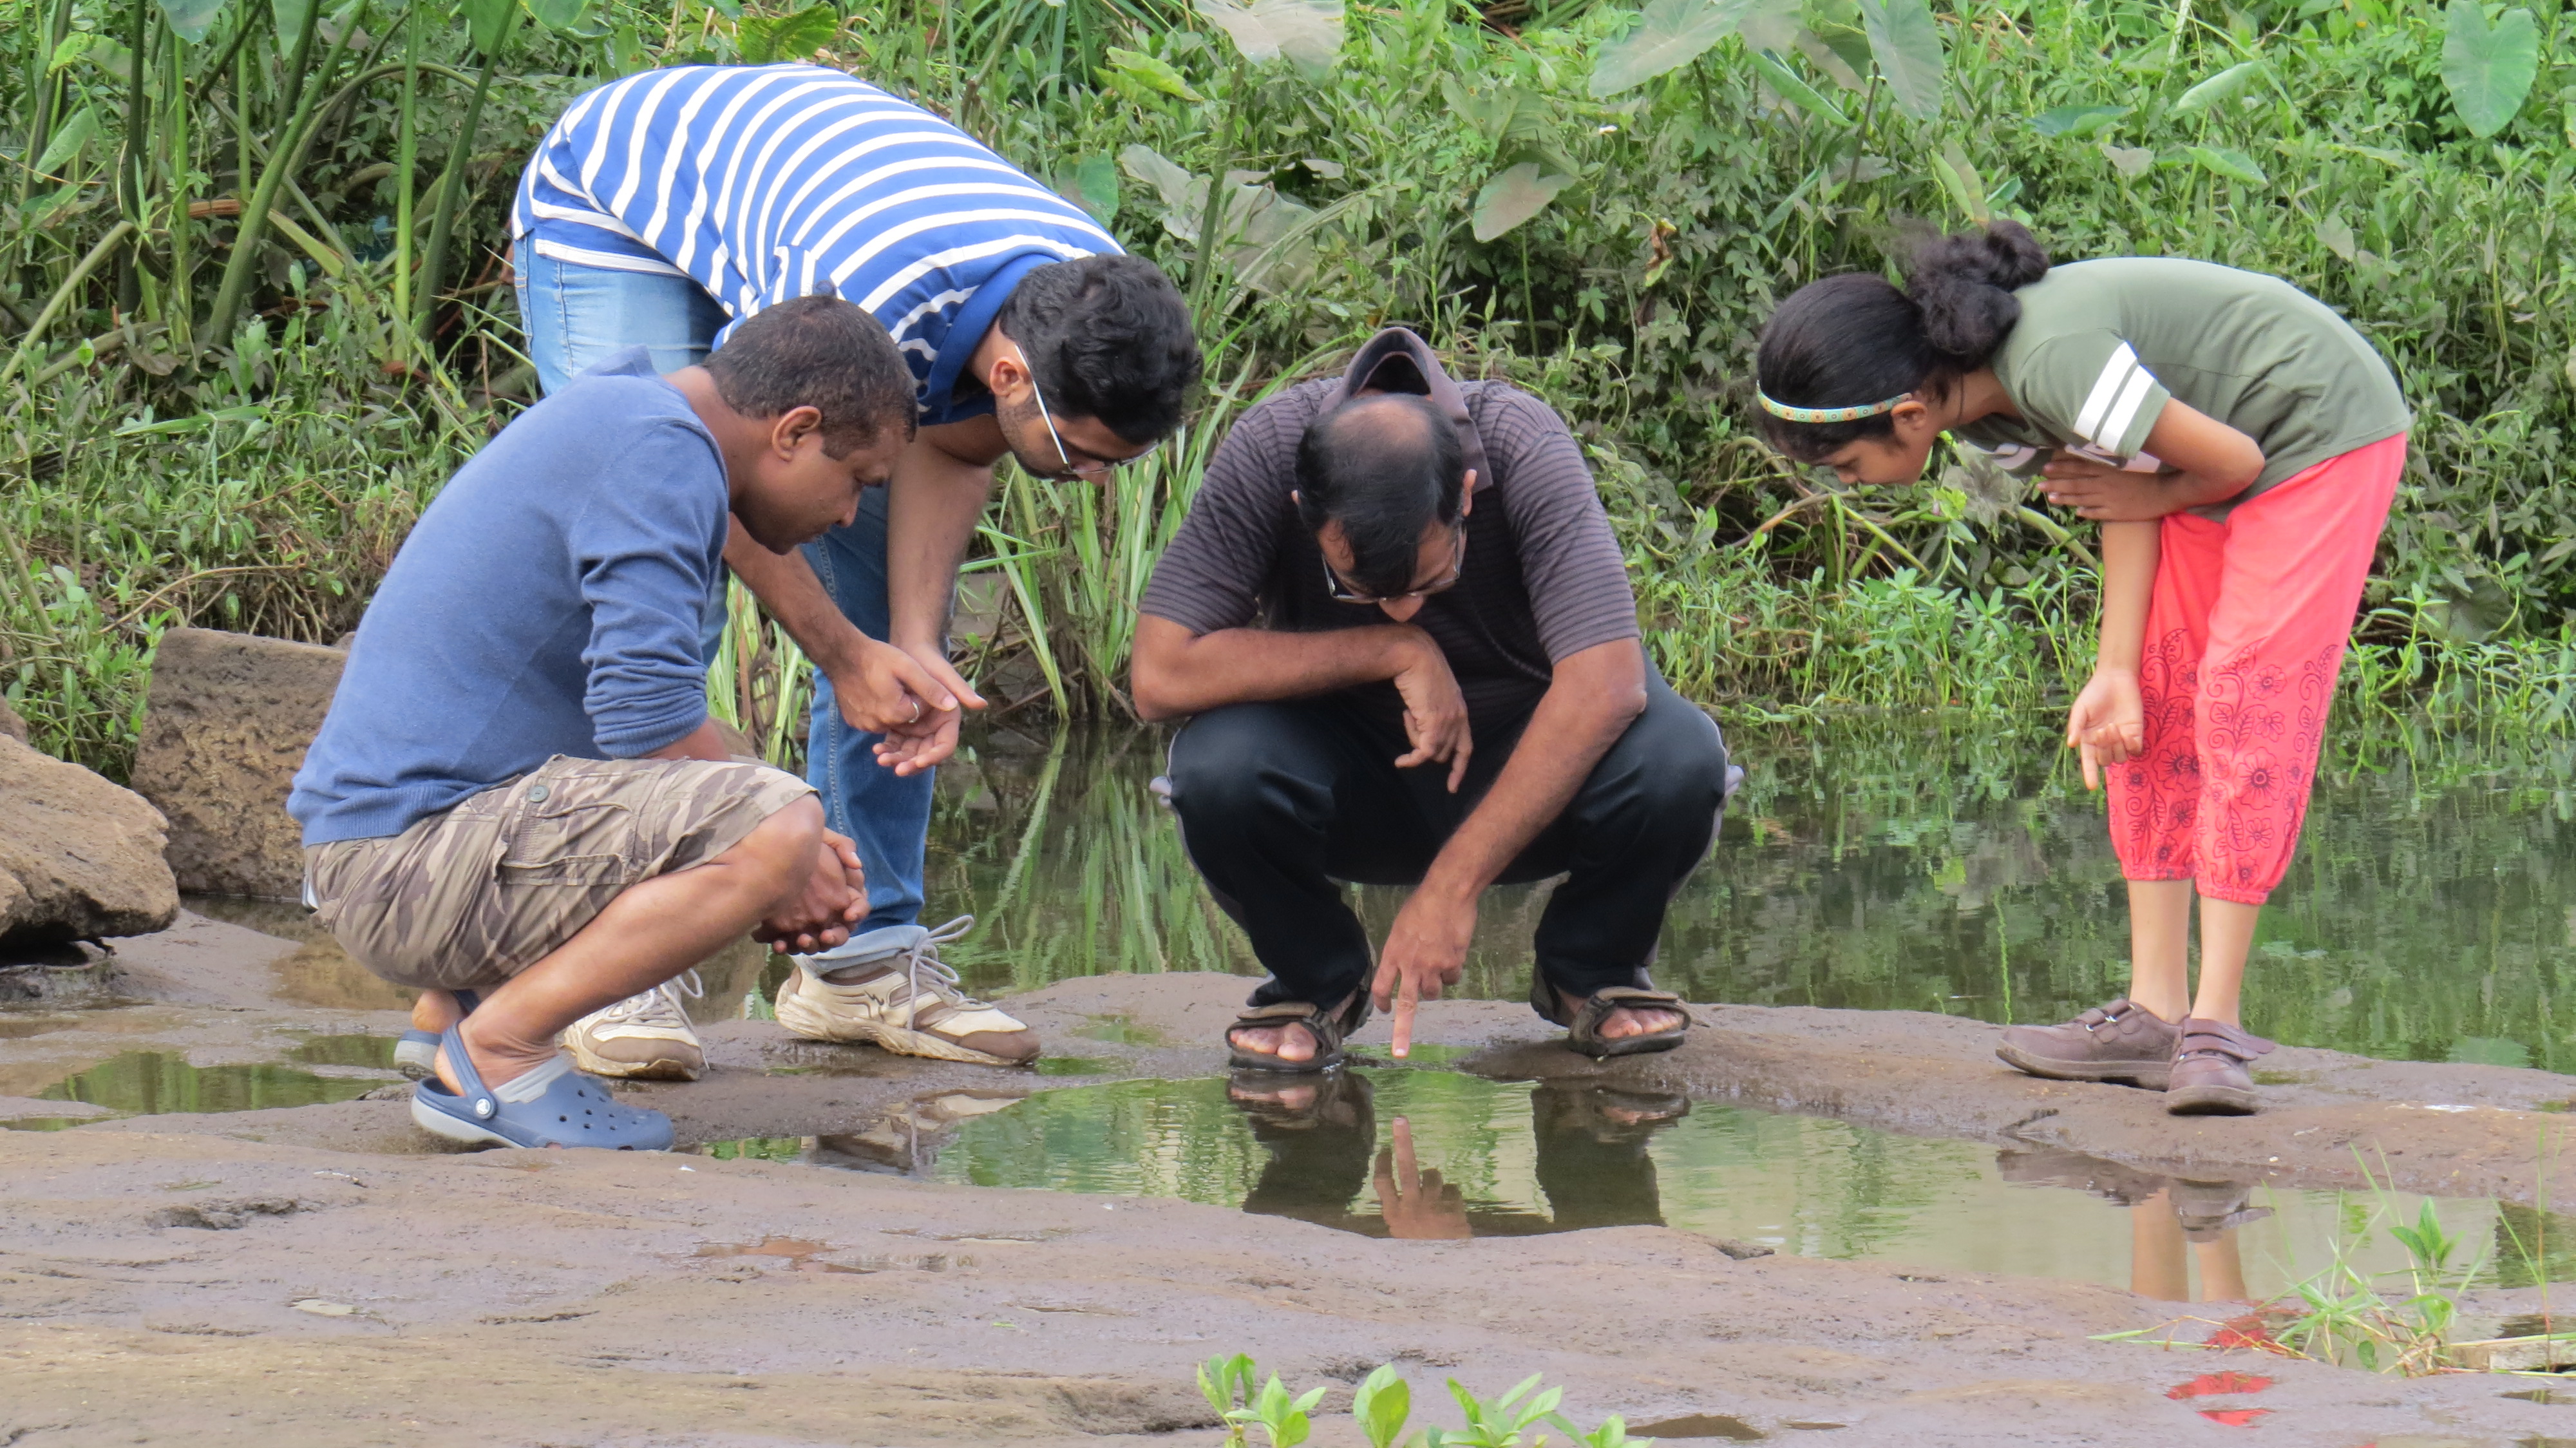 Identification of rock pool sites for sampling at the Vitthalwadi stretch of the Mutha river (Image Source: Jeevitnadi)